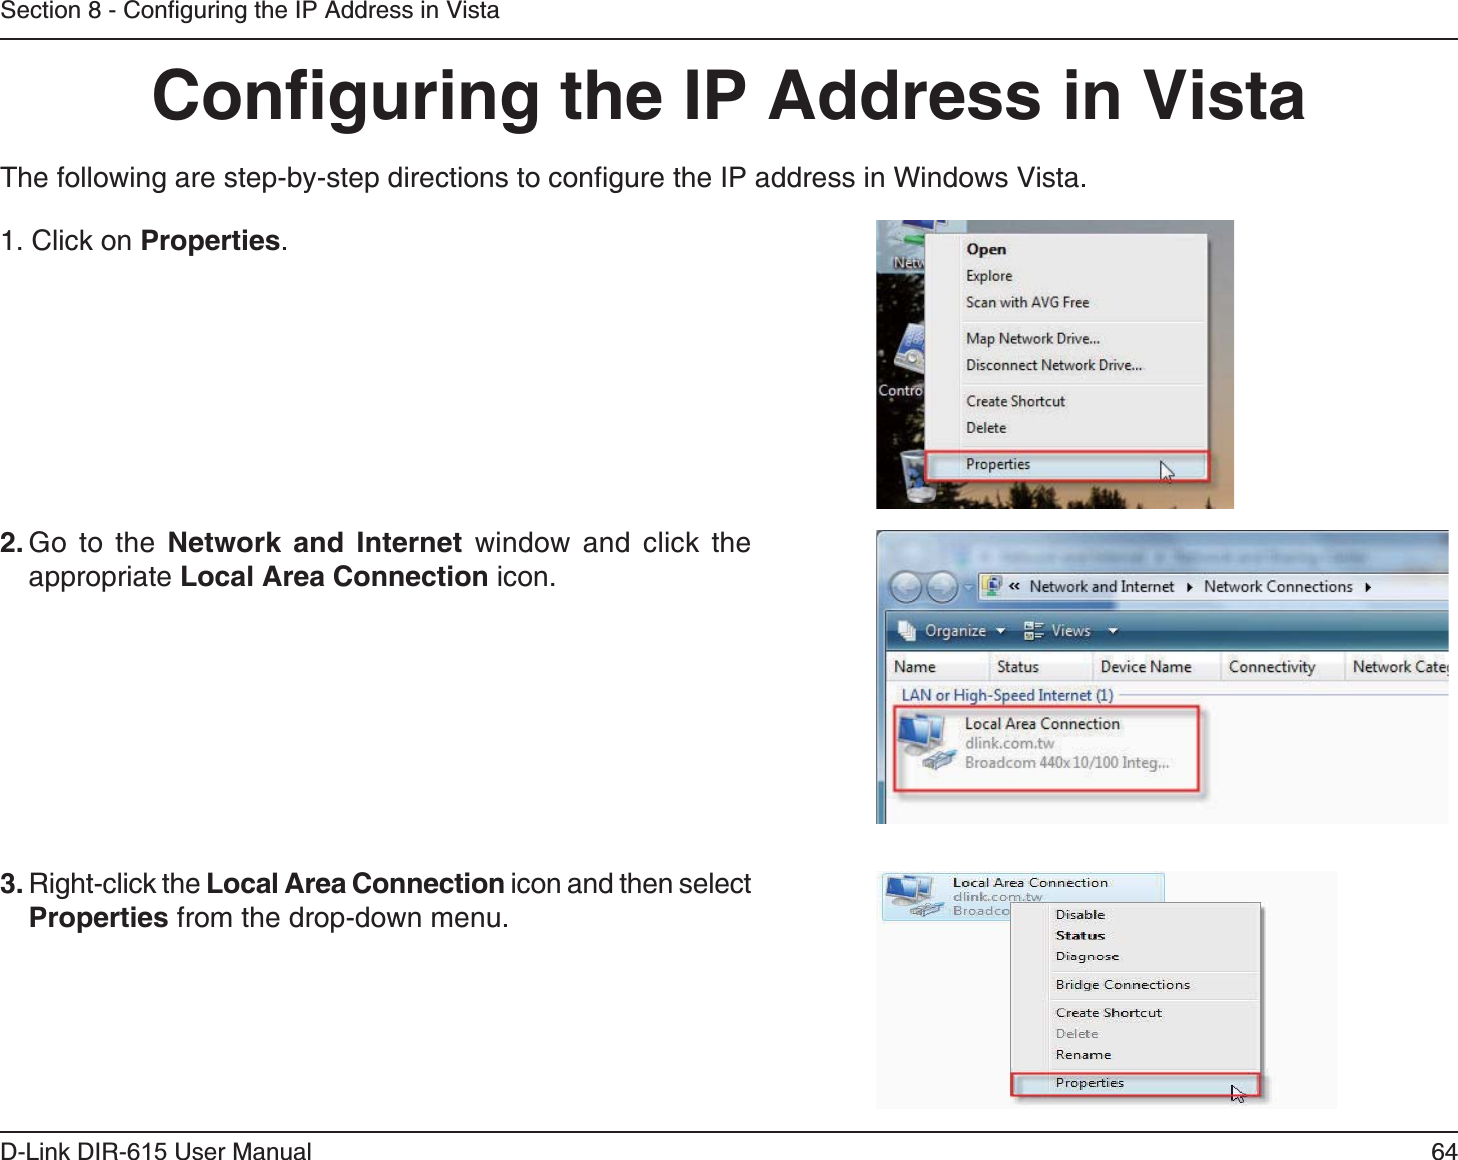 64D-Link DIR-6 User ManualSection 8 - Configuring the IP Address in VistaThe following are step-by-step directions to configure the IP address in Windows Vista. Go to the    window and click the appropriate  icon. 1. Click on .3. Right-click the  icon and then select  from the drop-down menu. 